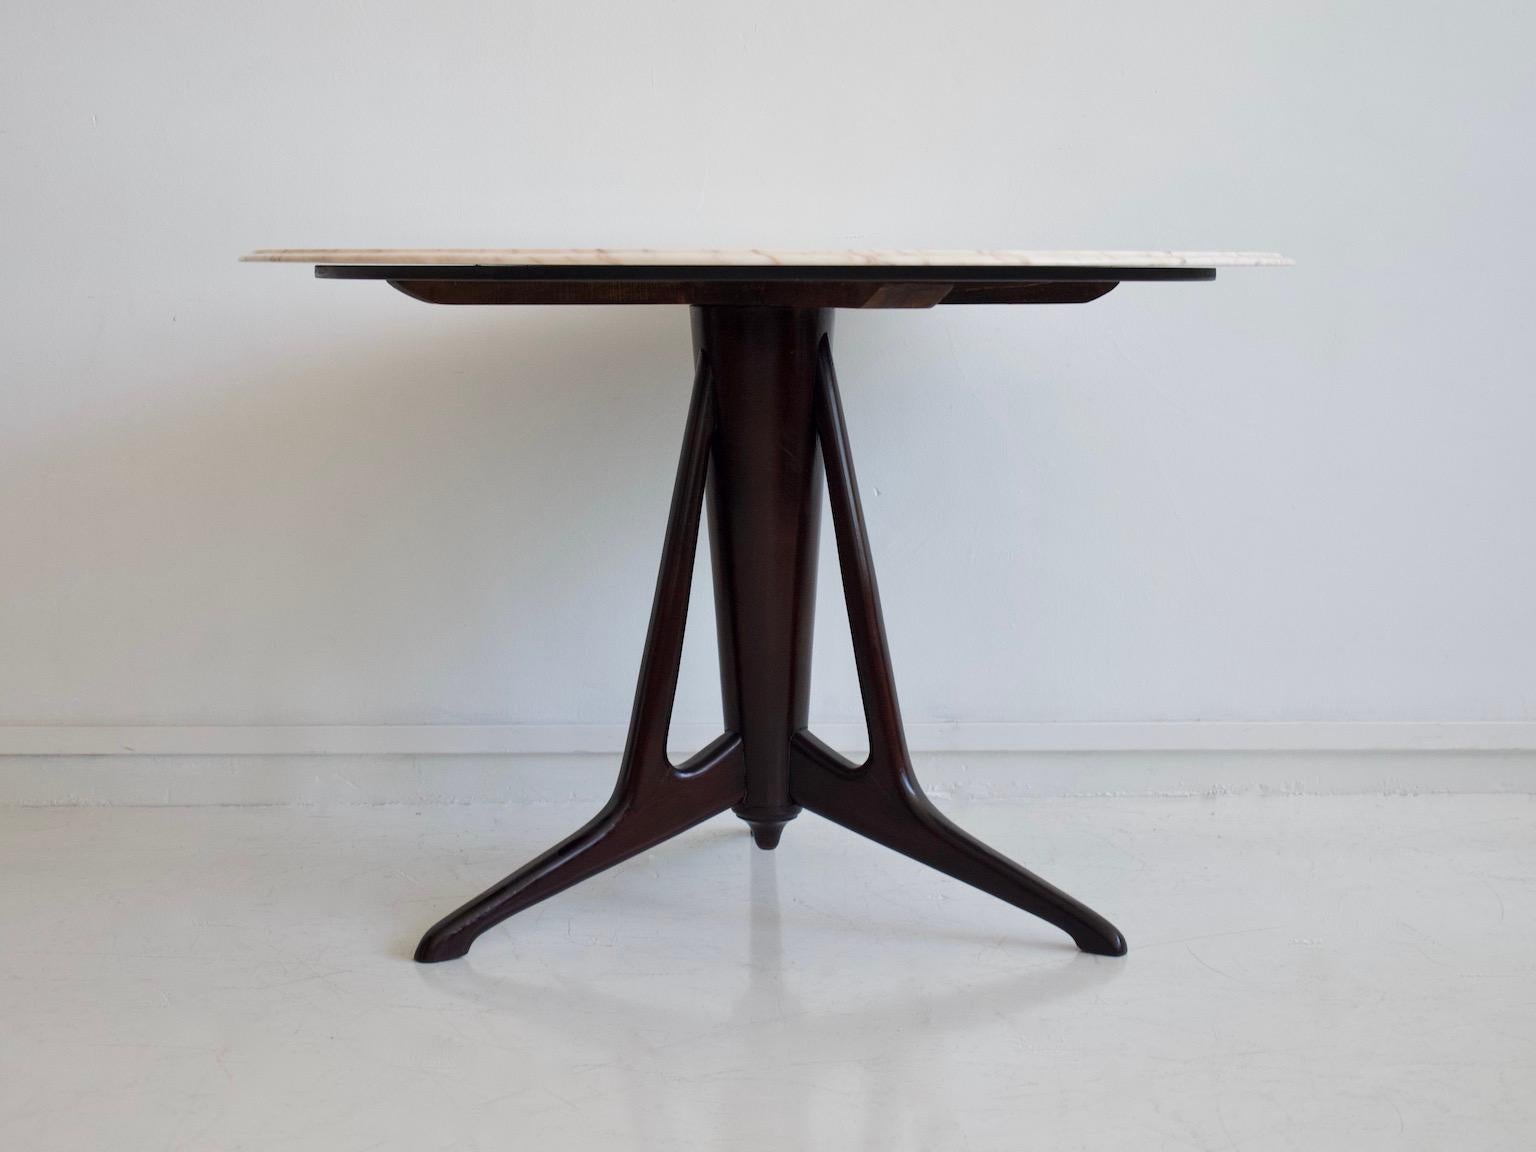 Round ebonized mahogany dining table with marble top attributed to Ico Parisi. Manufactured in Italy in the 1950s.